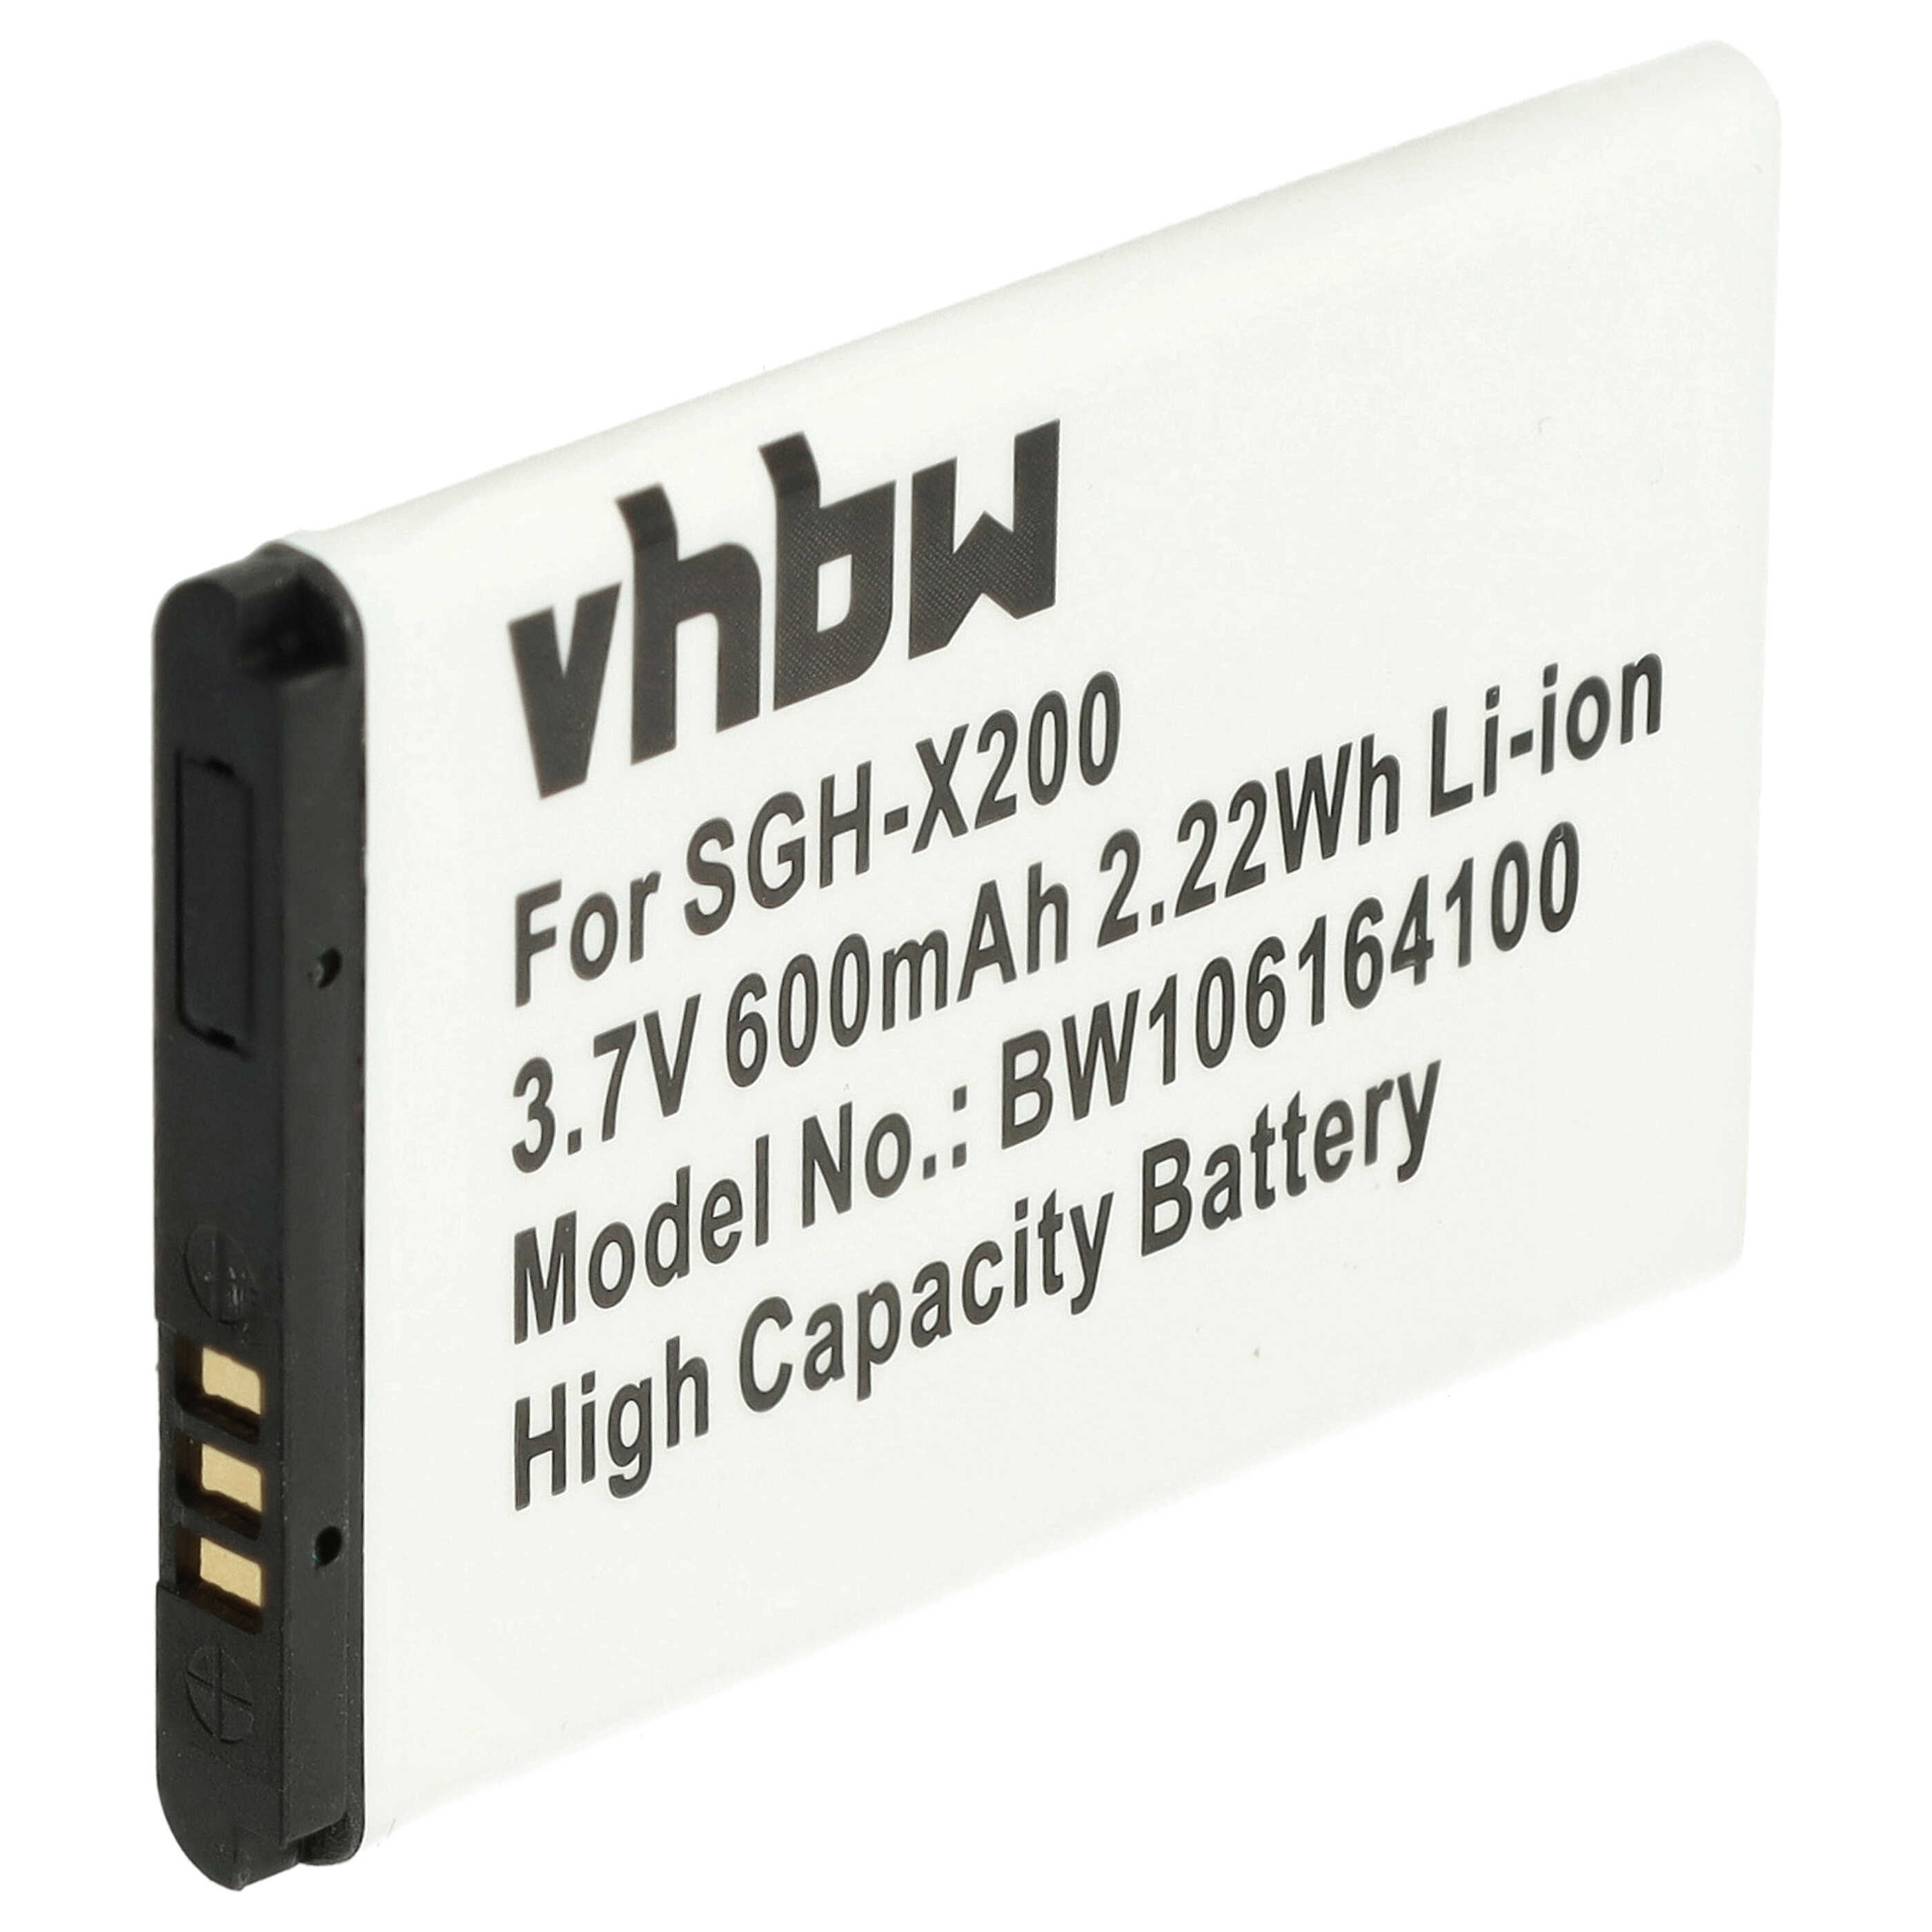 Mobile Phone Battery Replacement for Samsung AB043446LA, AB043446BC, AB043446BE - 600mAh 3.7V Li-Ion